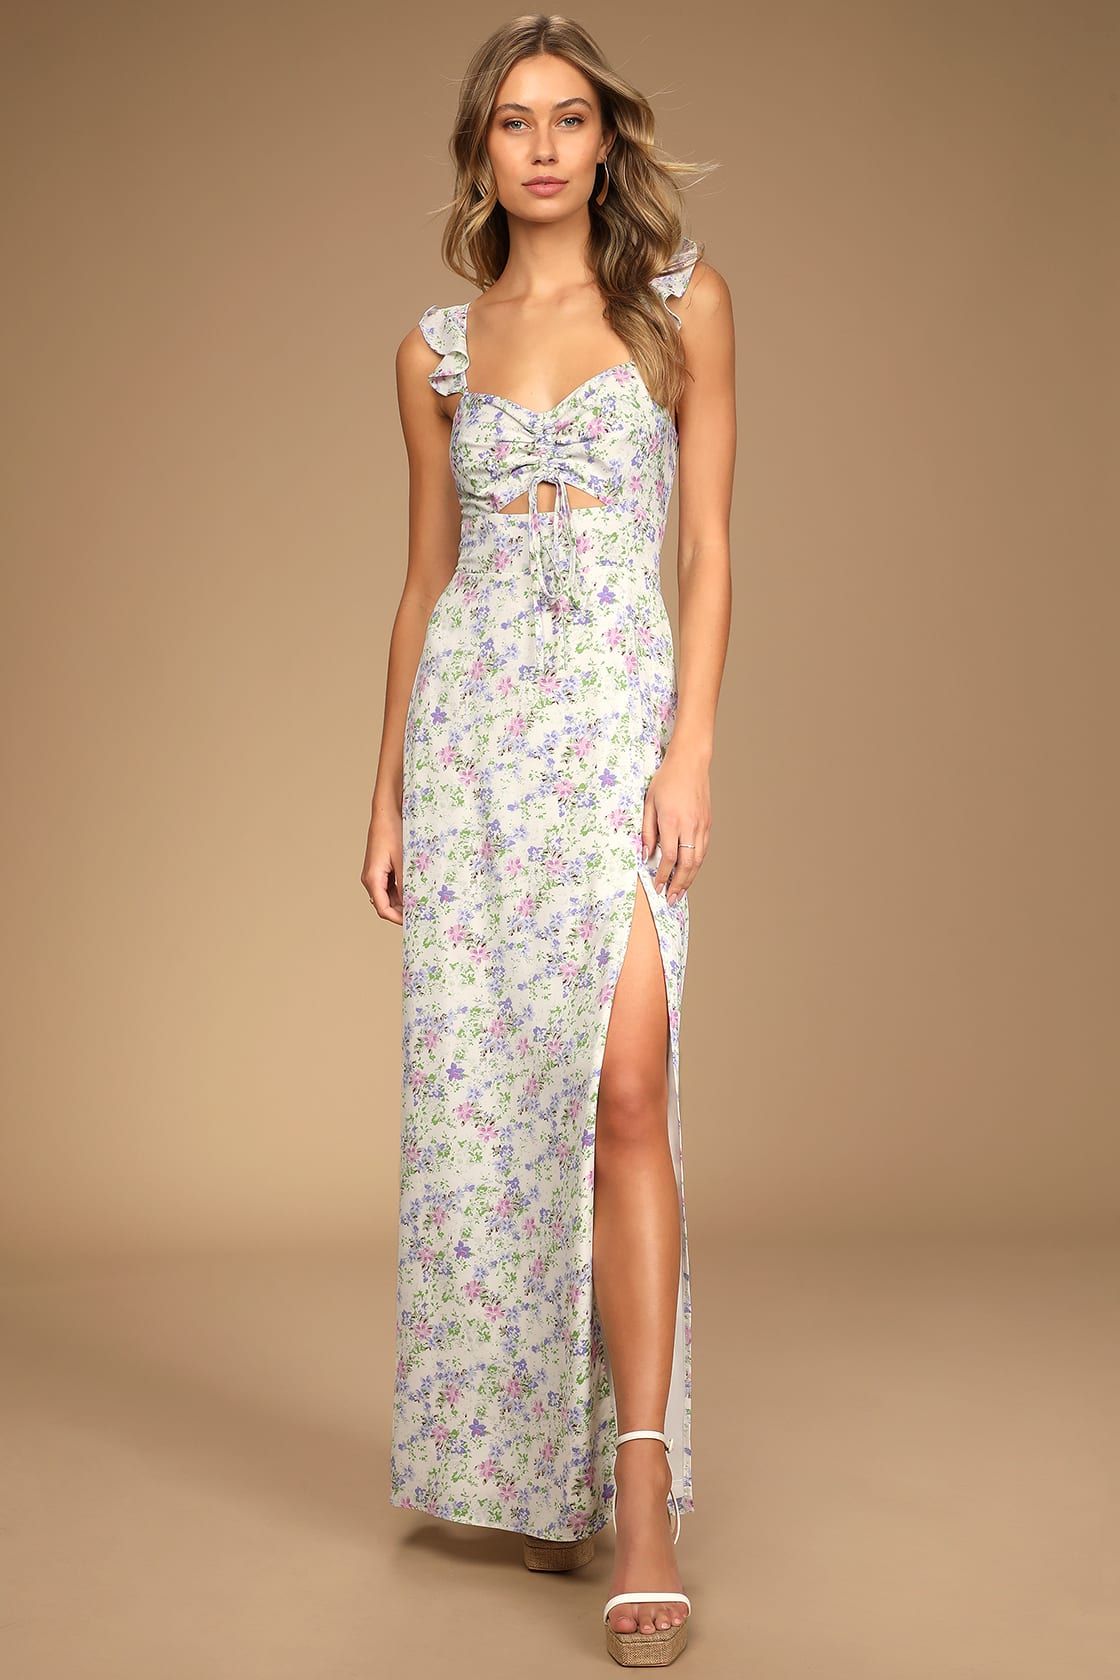 The Way to Love Ivory Floral Print Ruffled Maxi Dress | Lulus (US)